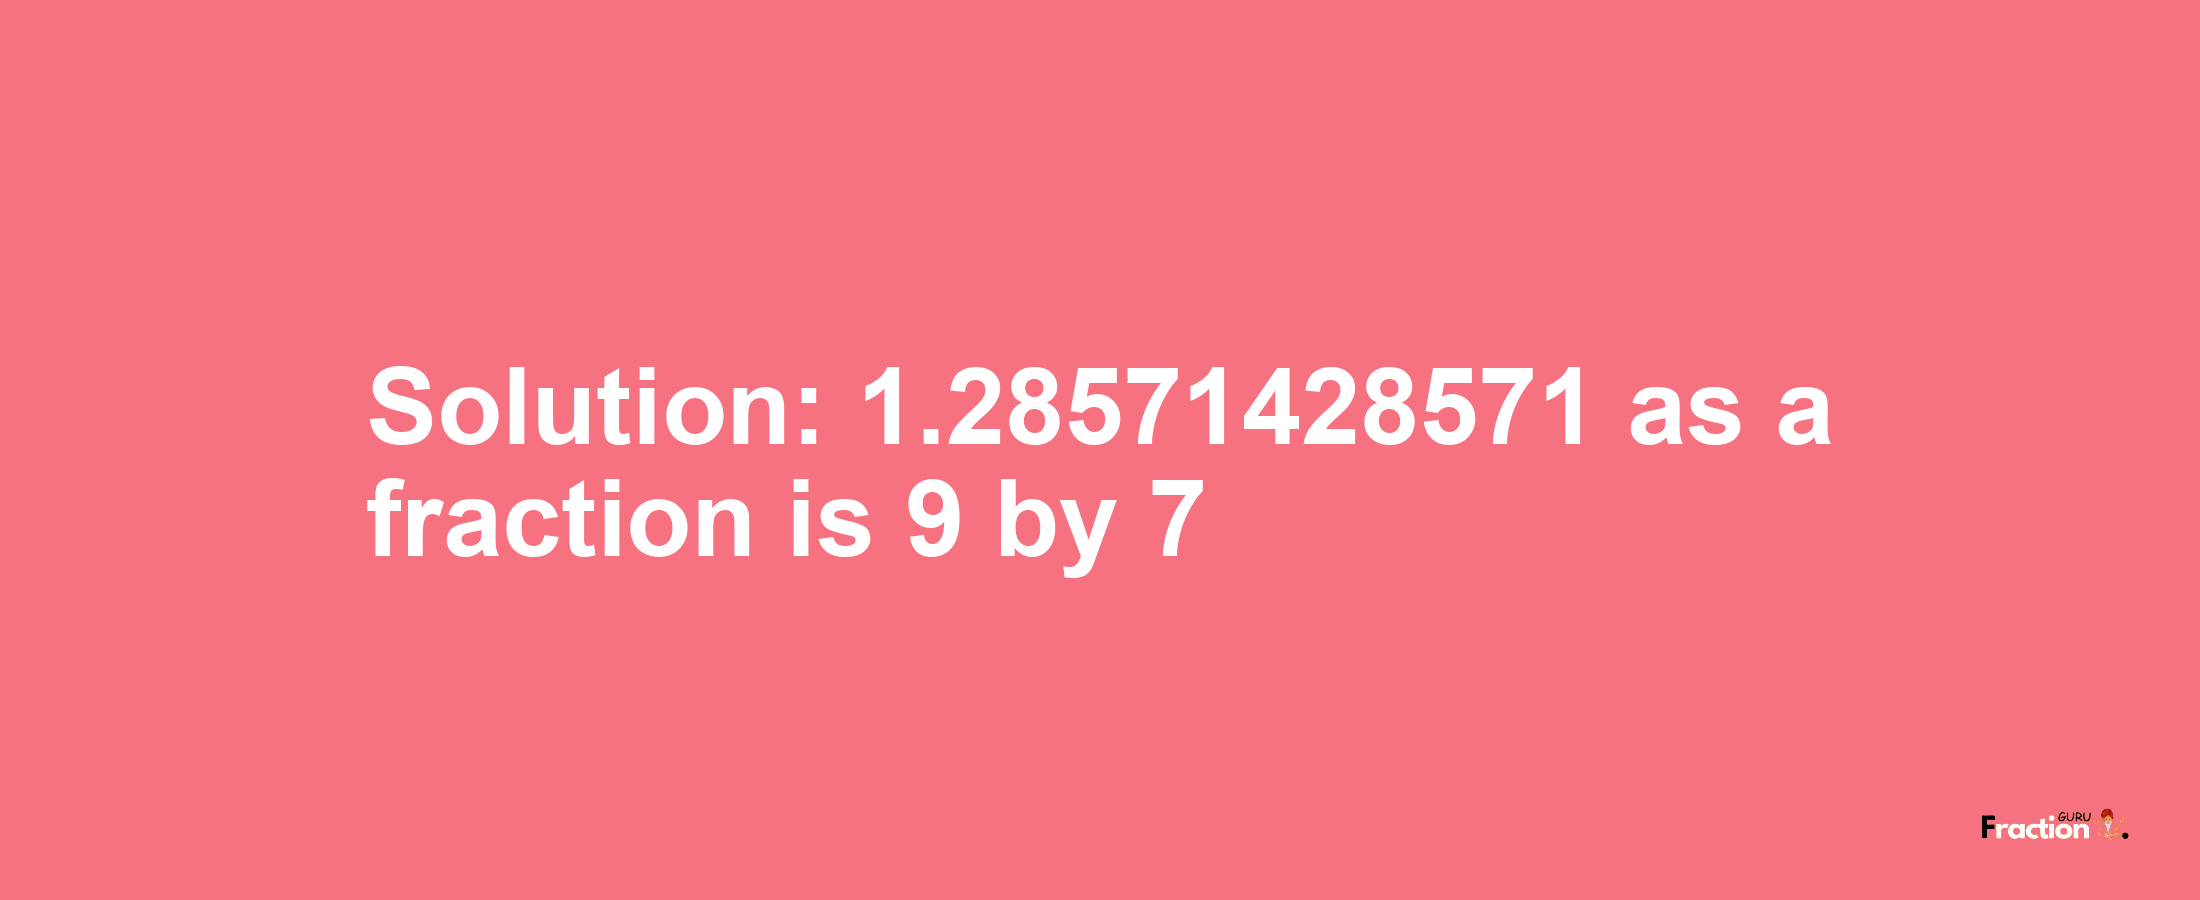 Solution:1.28571428571 as a fraction is 9/7